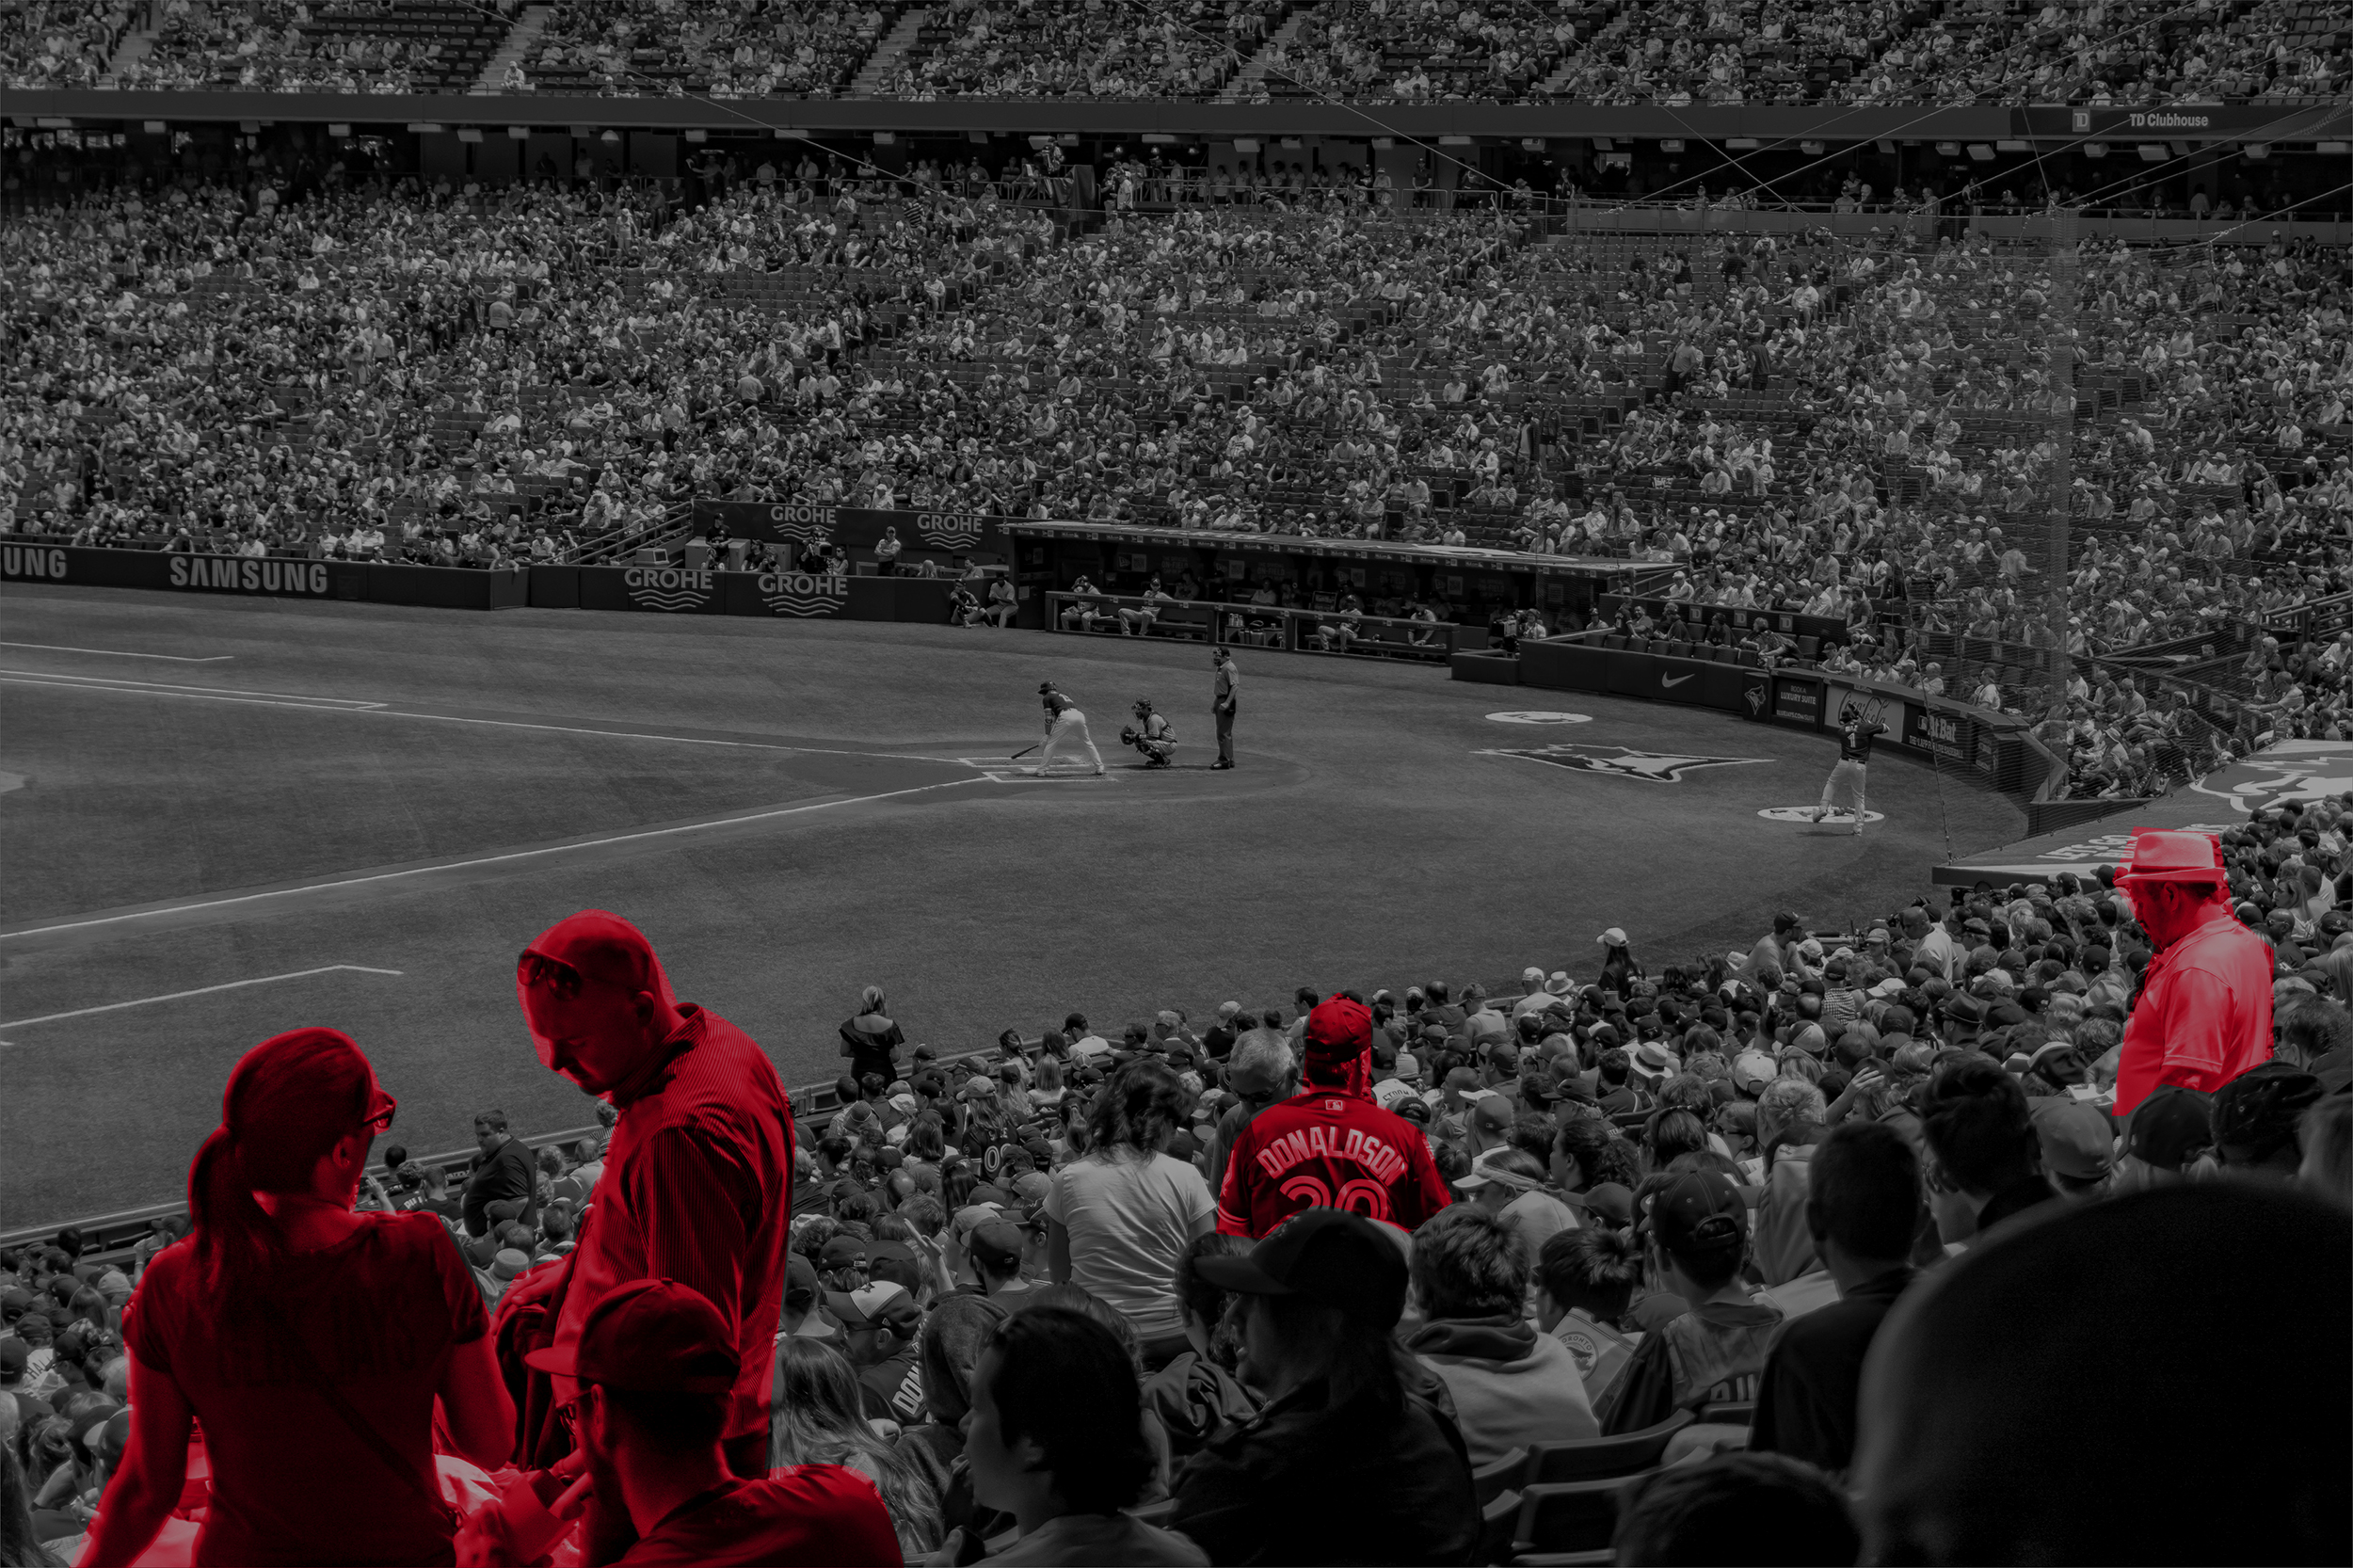 Sports and entertainment anomaly detection